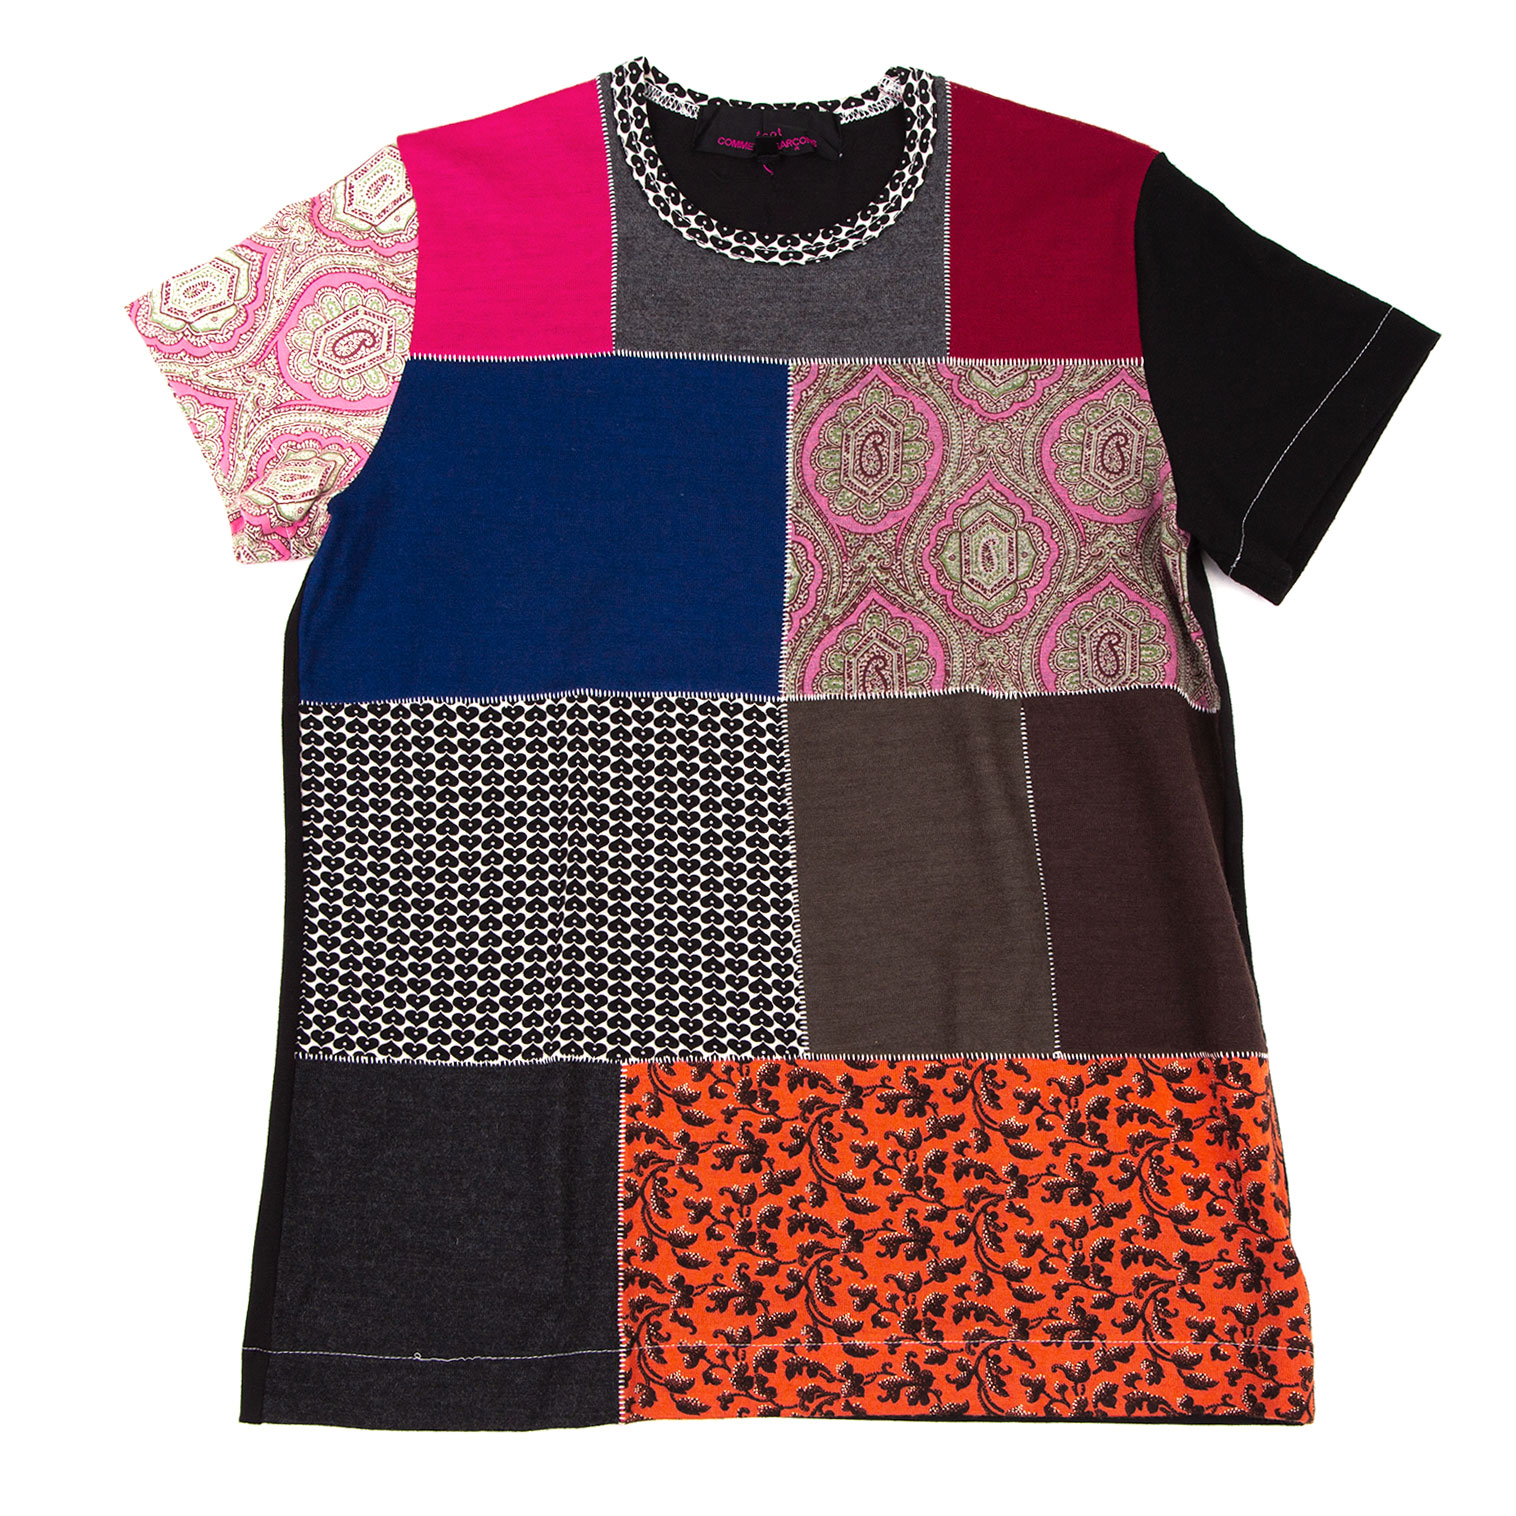 tricot COMME des GARCONS パッチワーク Tシャツ $ - Tシャツ